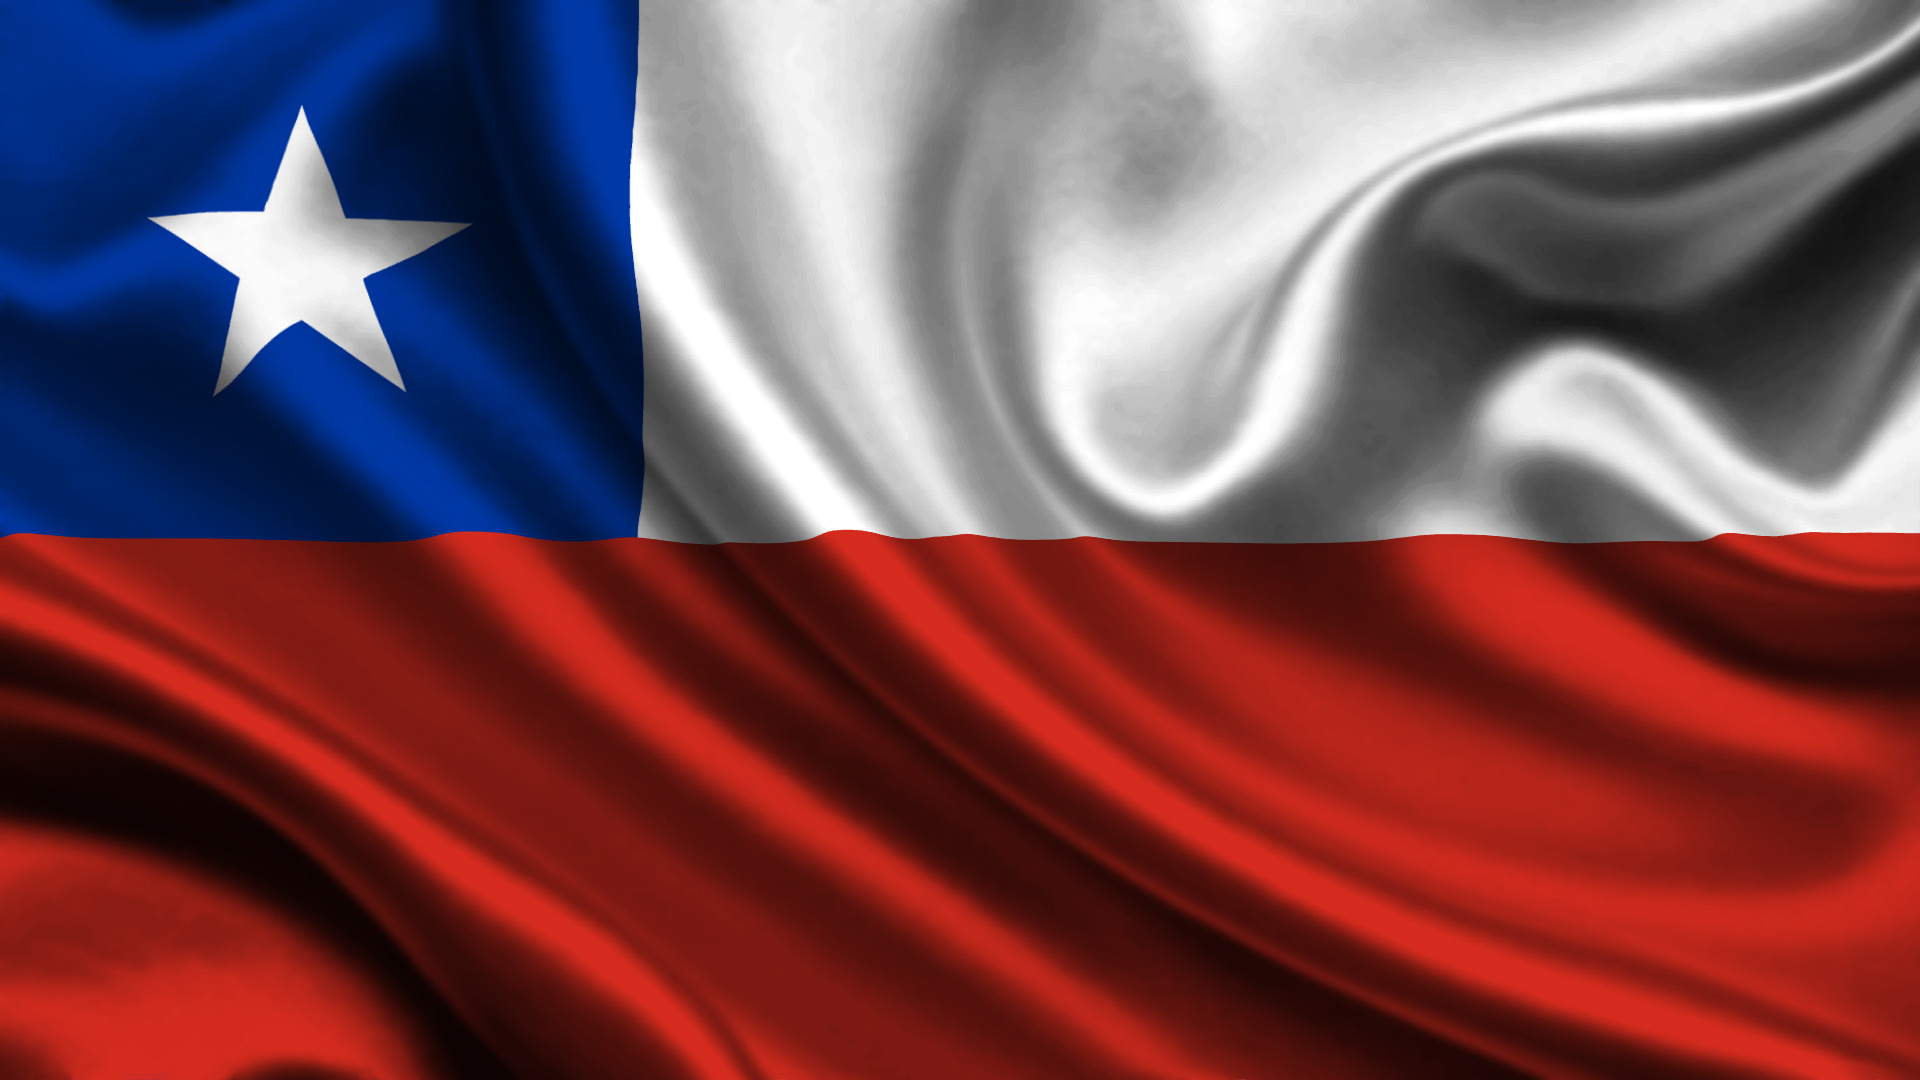 Chile: Salvador Allende was overthrown in 1973 in a coup led by Augusto Pinochet. 1920x1080 Full HD Wallpaper.